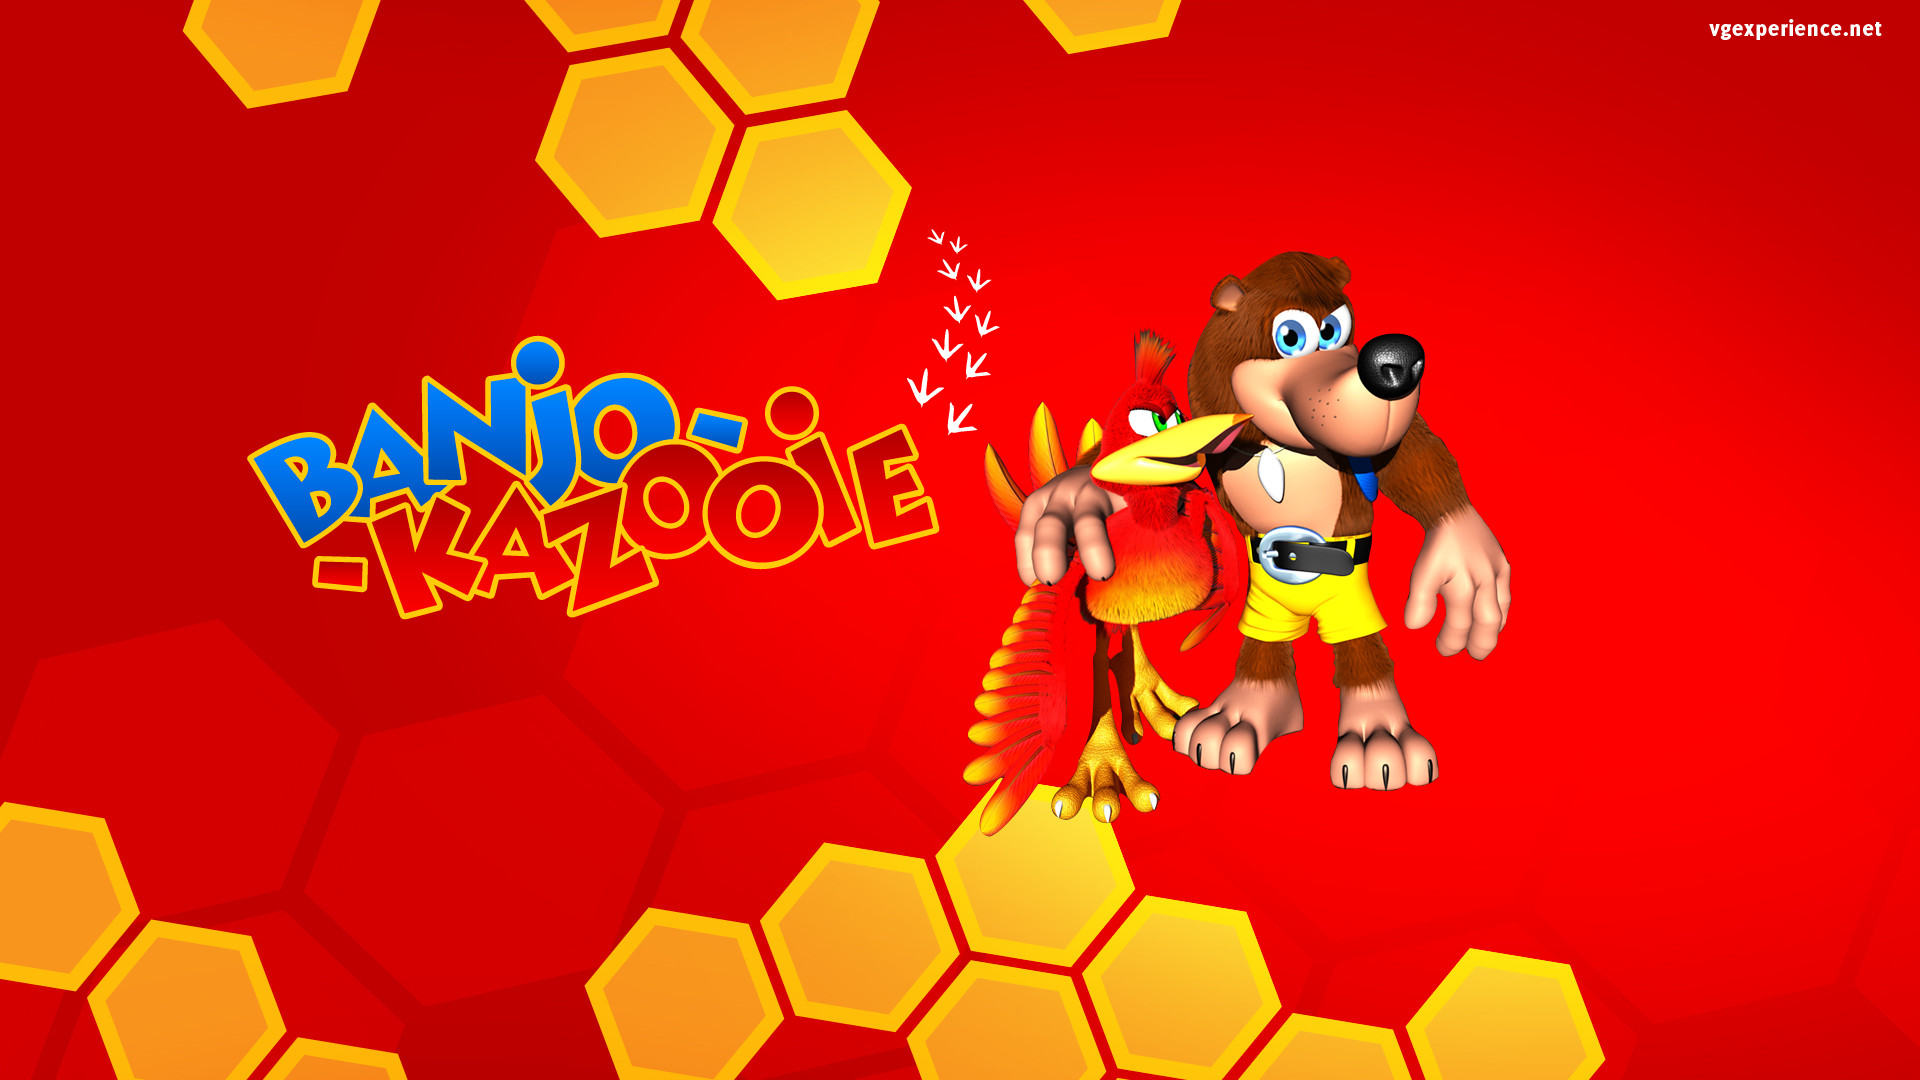 1920x1080 Banjo Kazooie Tooie Wallpapers HD Nuts And Bolts Nintendo 64 Best Banjo  Kazooie Background in High Quality ...